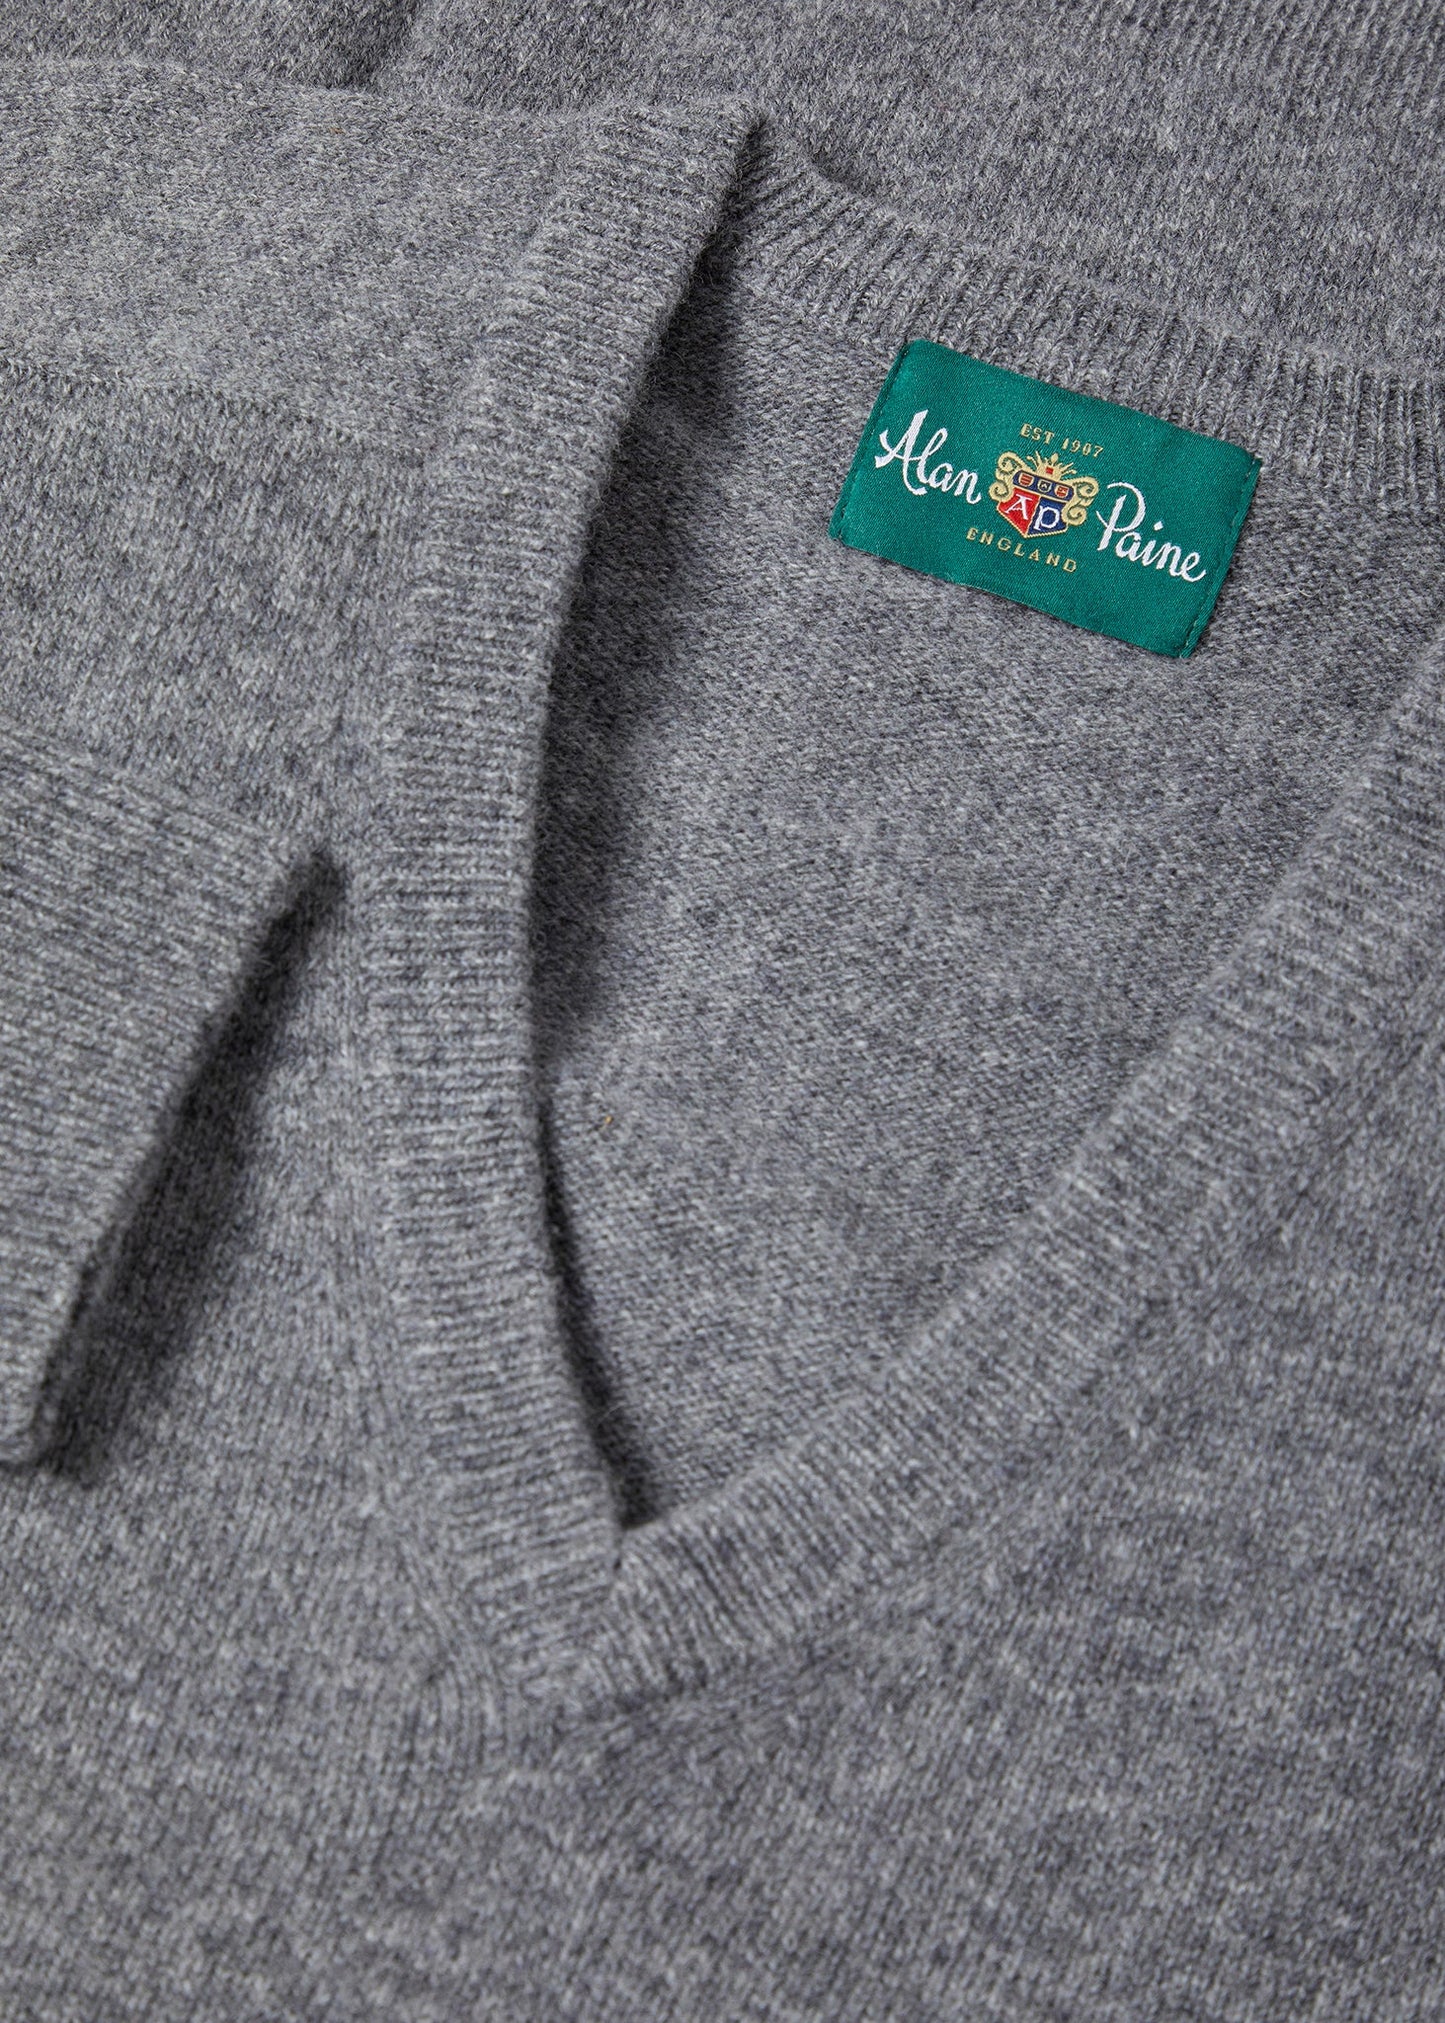 Hampshire Lambswool Sweater in Grey Mix - Classic Fit